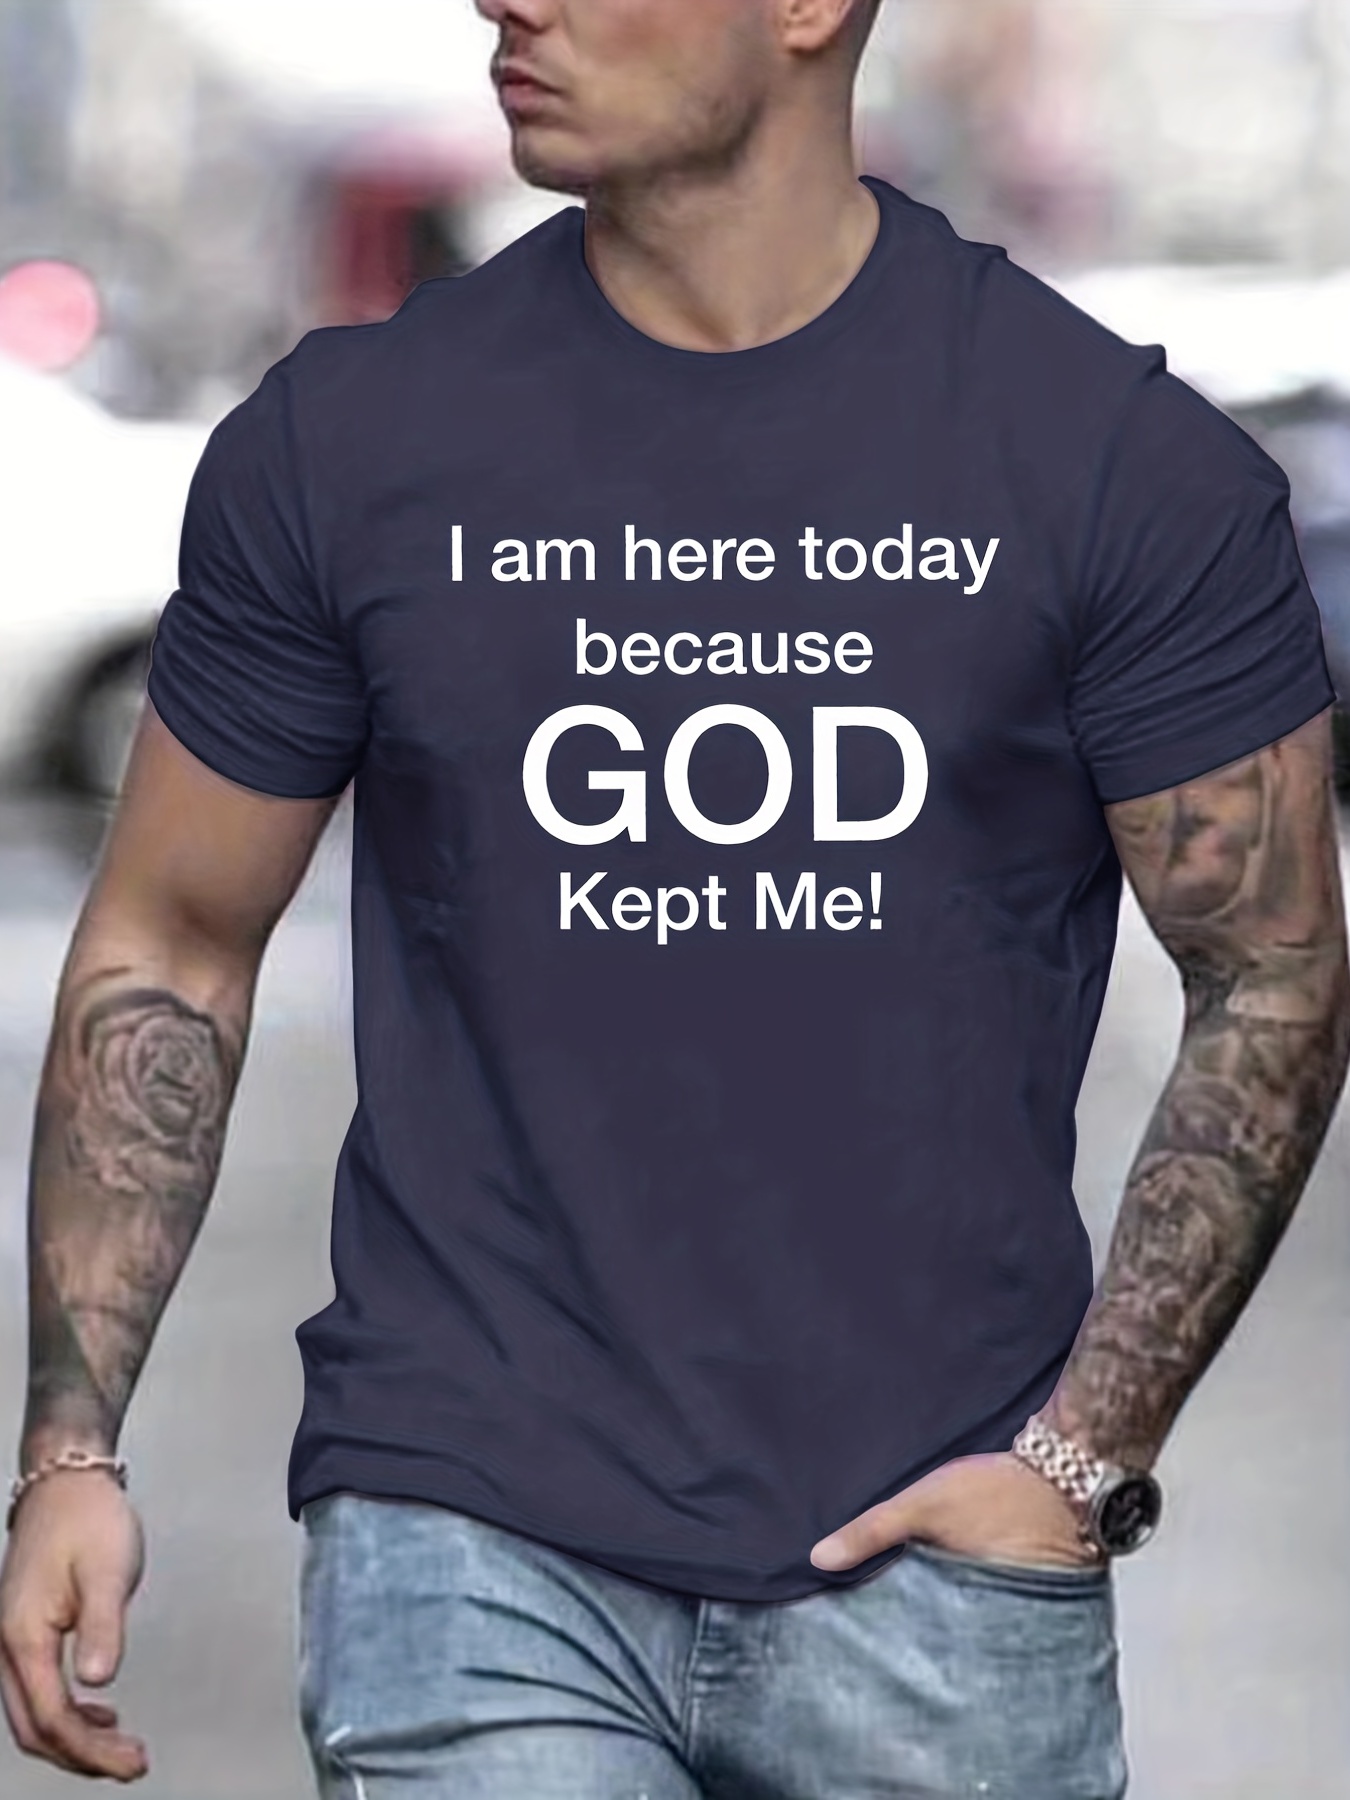 tees for men god kept me print t shirt casual short sleeve tshirt for summer spring fall tops as gifts details 7